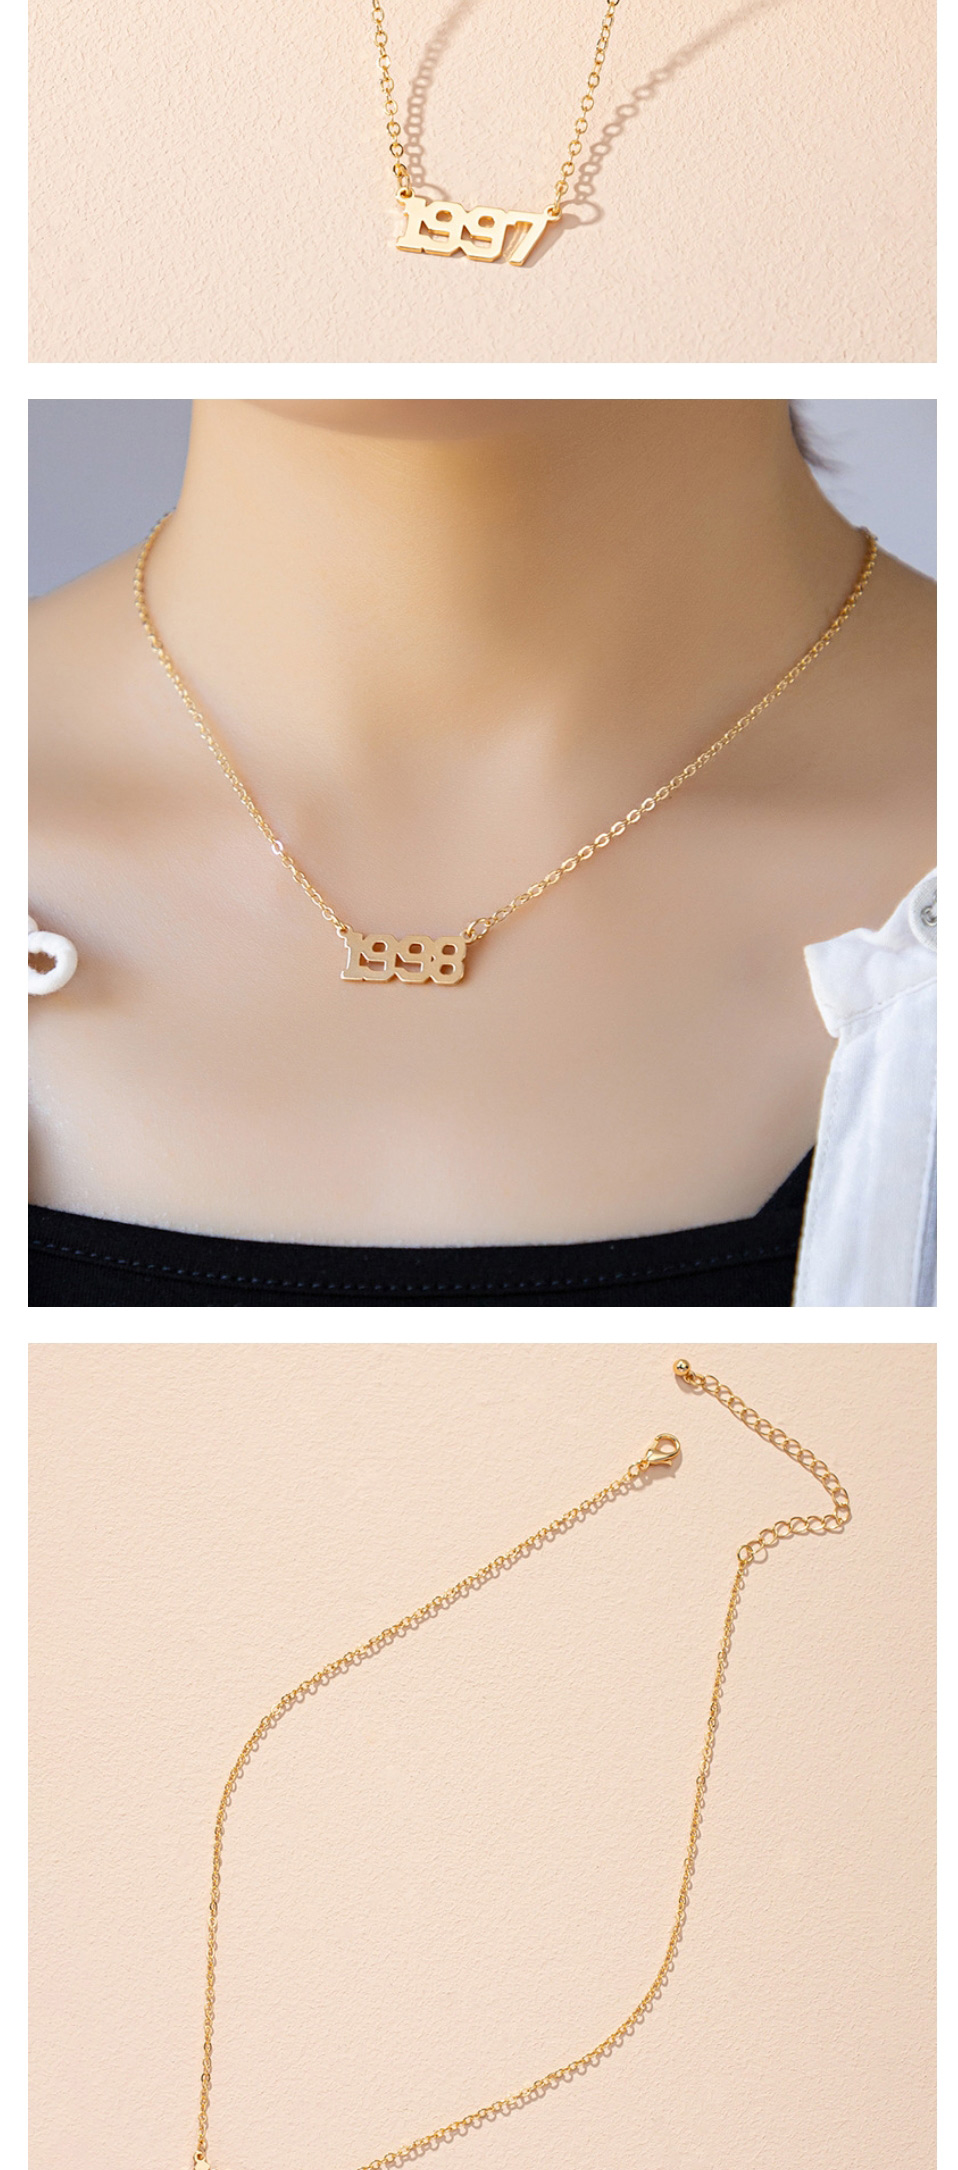 Fashion 2005 Alloy Number Necklace,Pendants